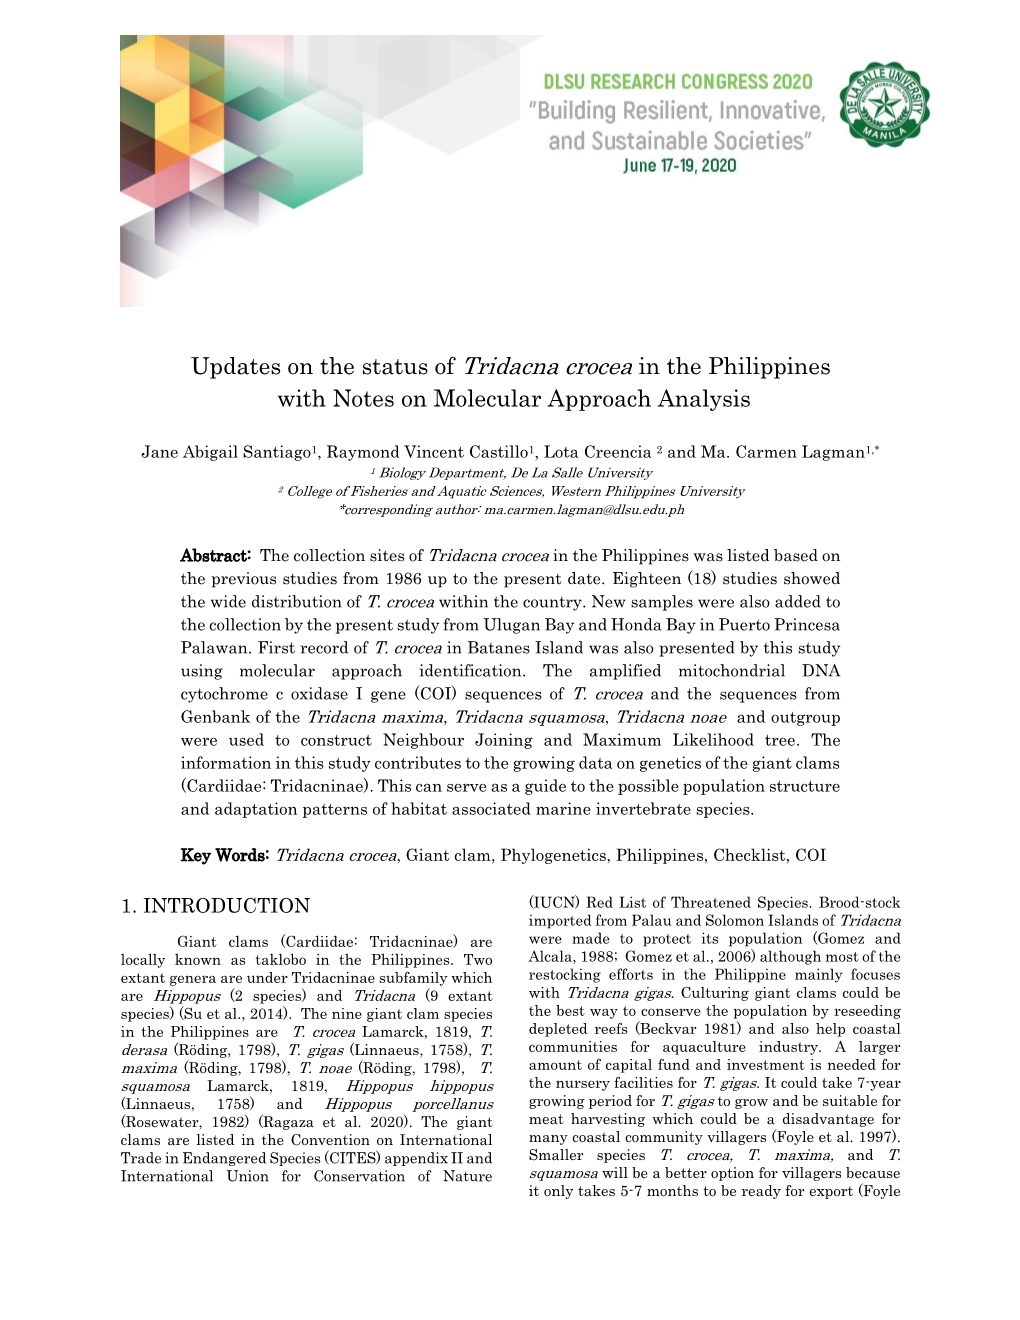 Updates on the Status of Tridacna Crocea in the Philippines with Notes on Molecular Approach Analysis